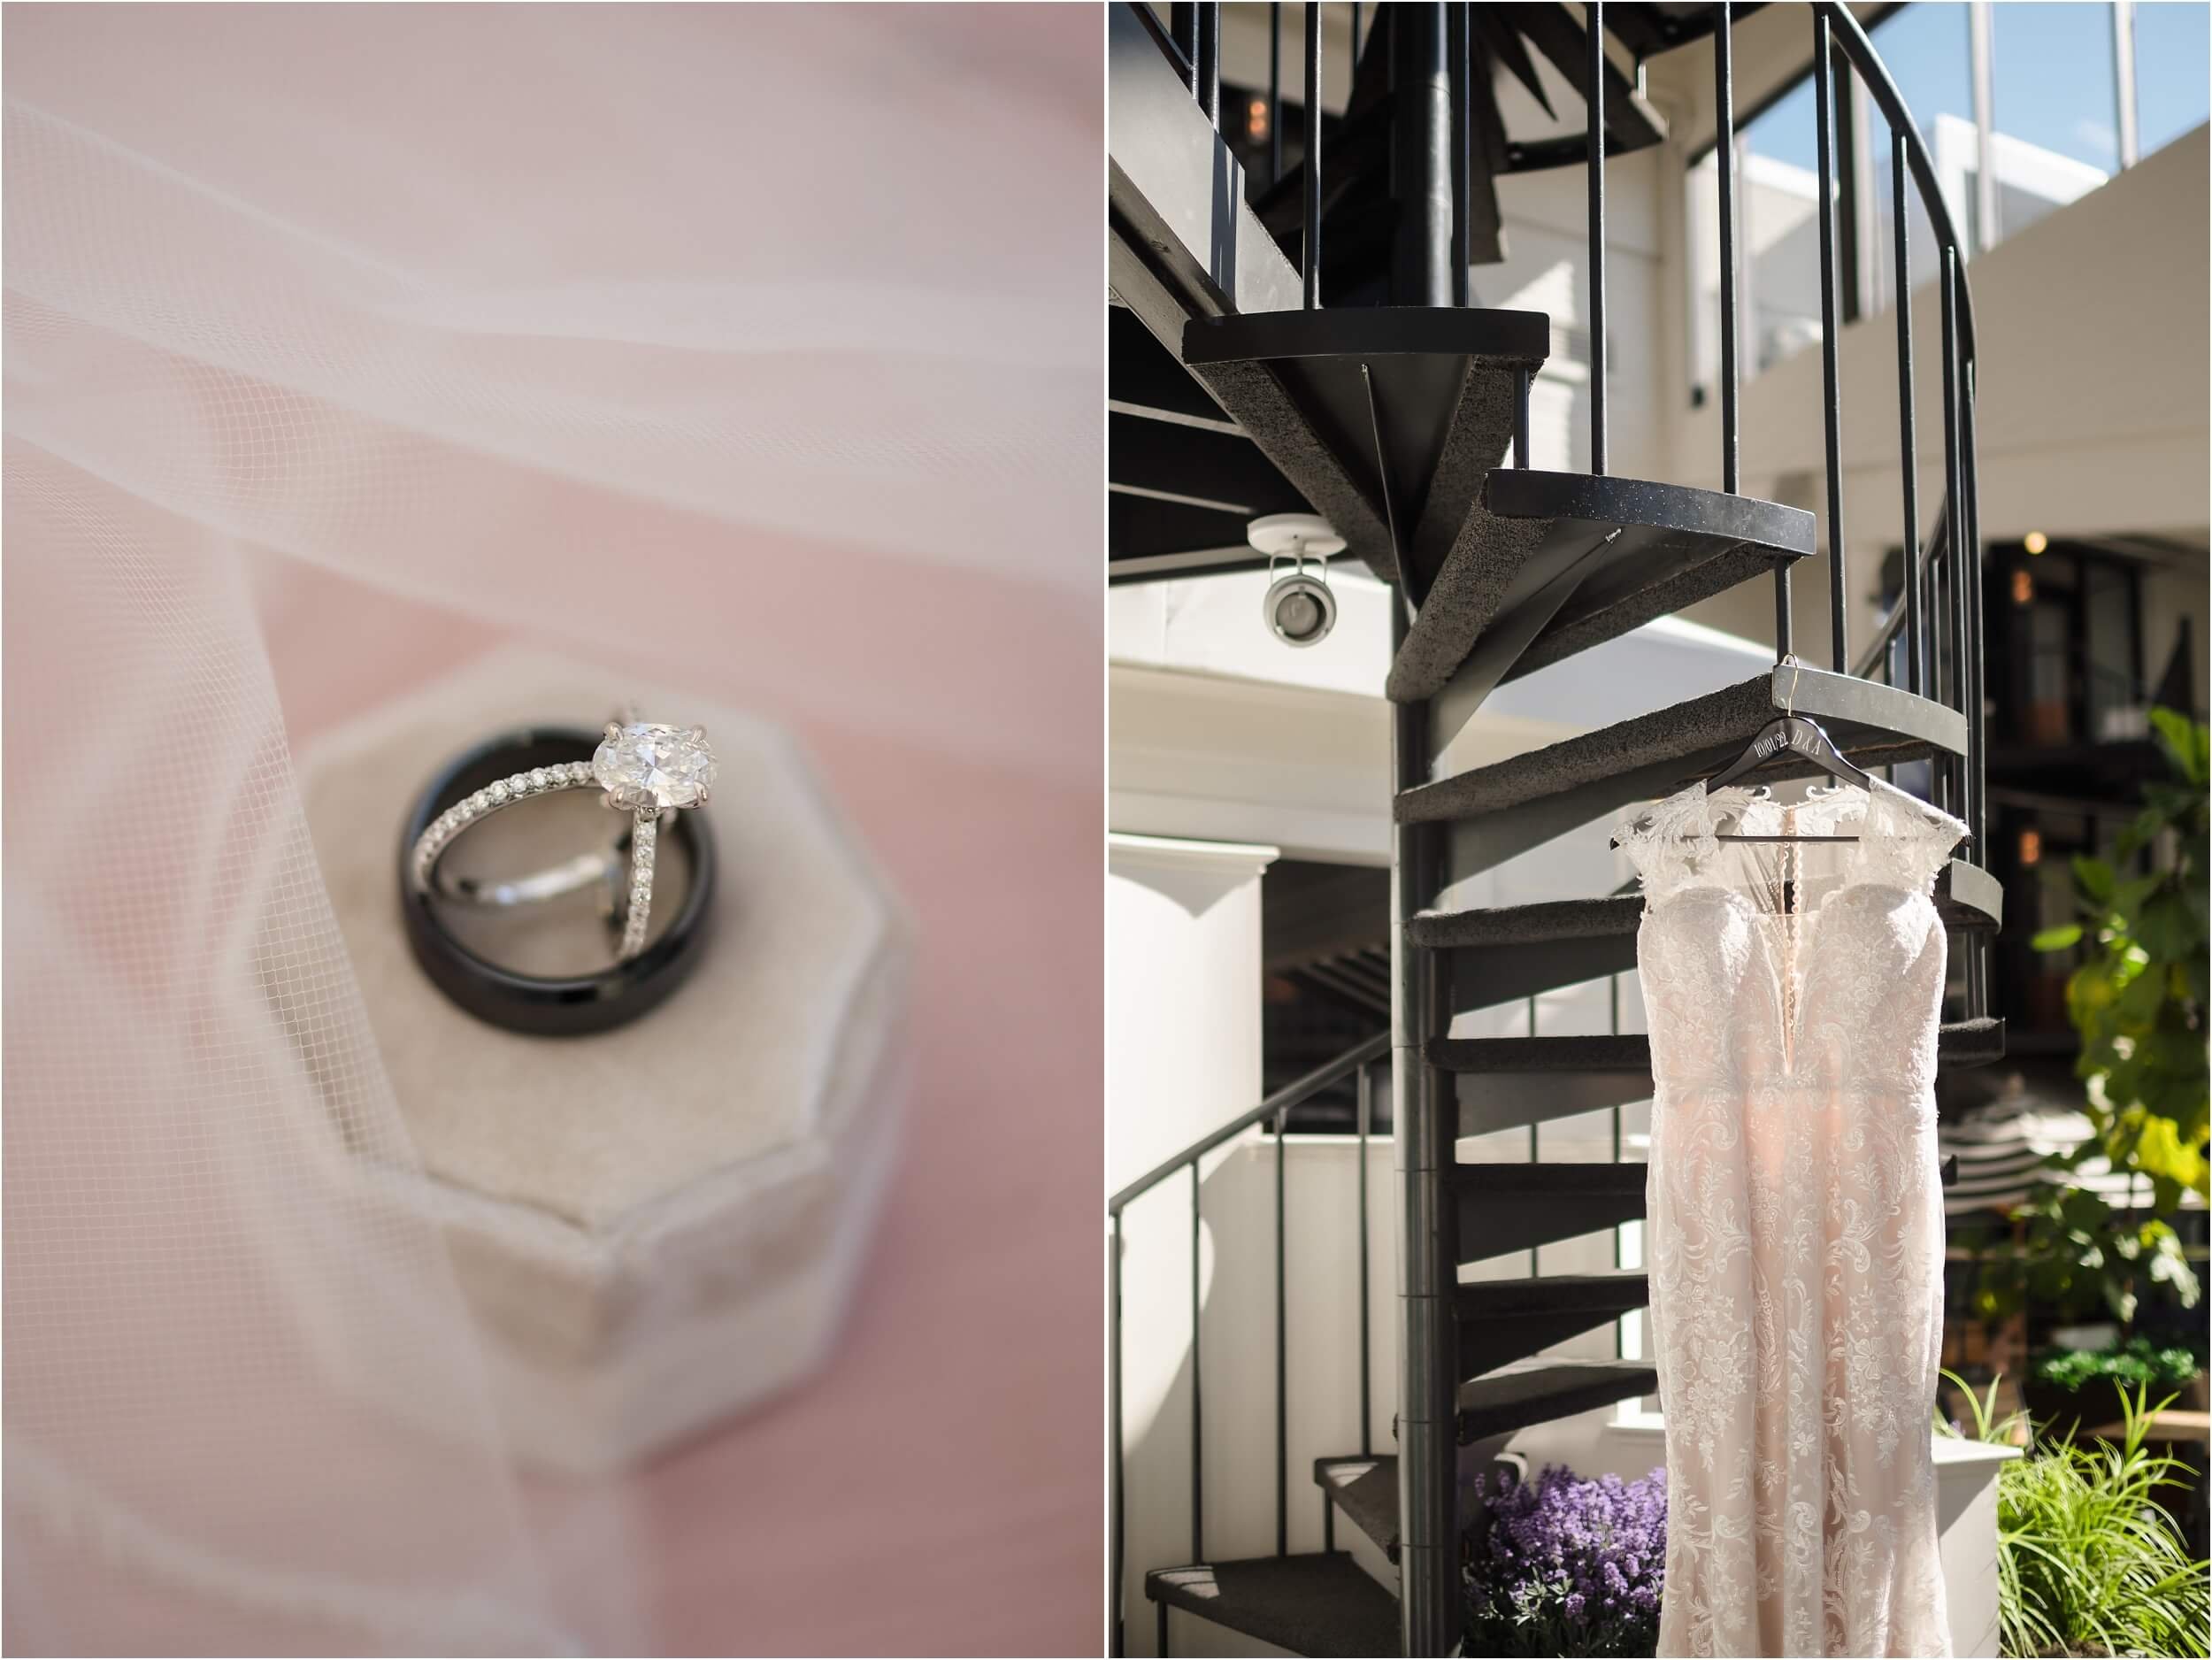  A close-up of wedding rings and a dress hanging on a spiral staircase inside Webers Hotel.  